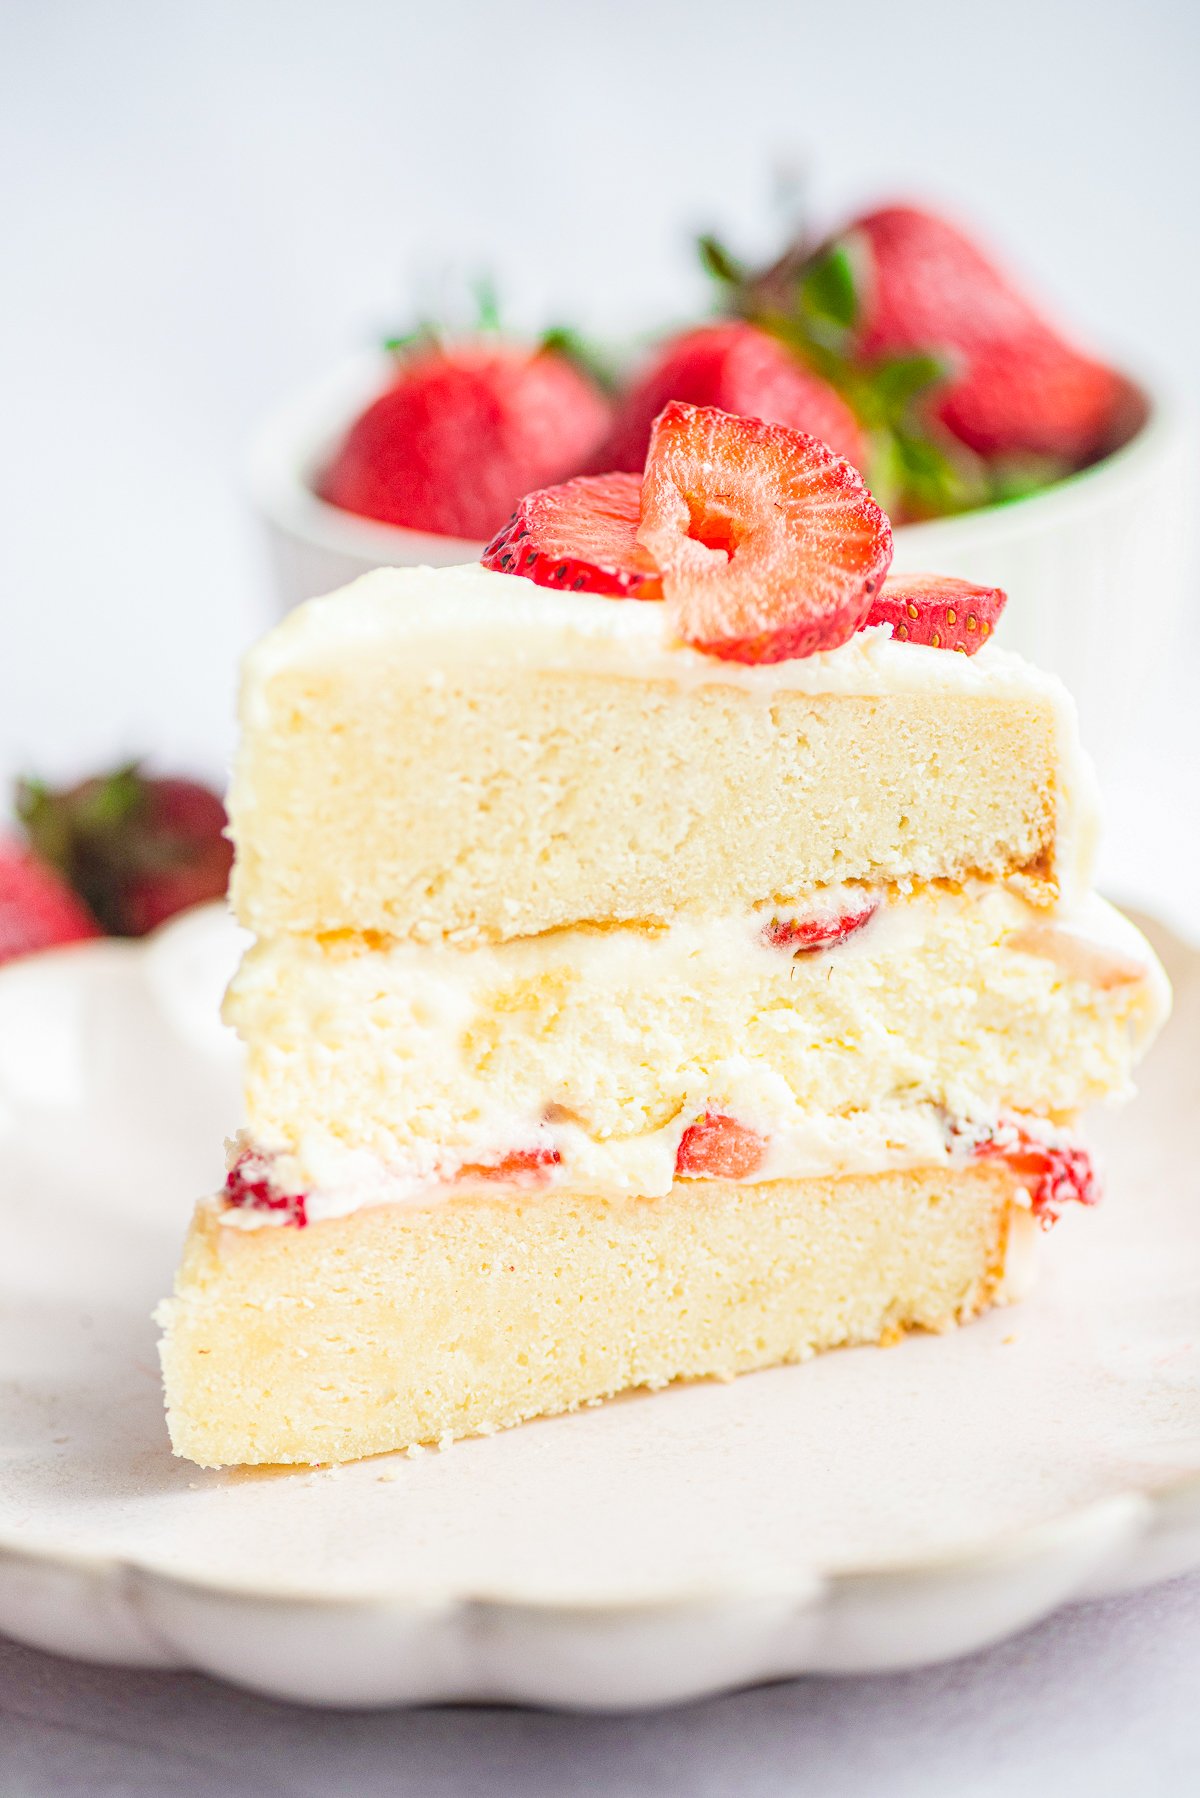 Slice of cake on white plate showing each layers topped with strawberries